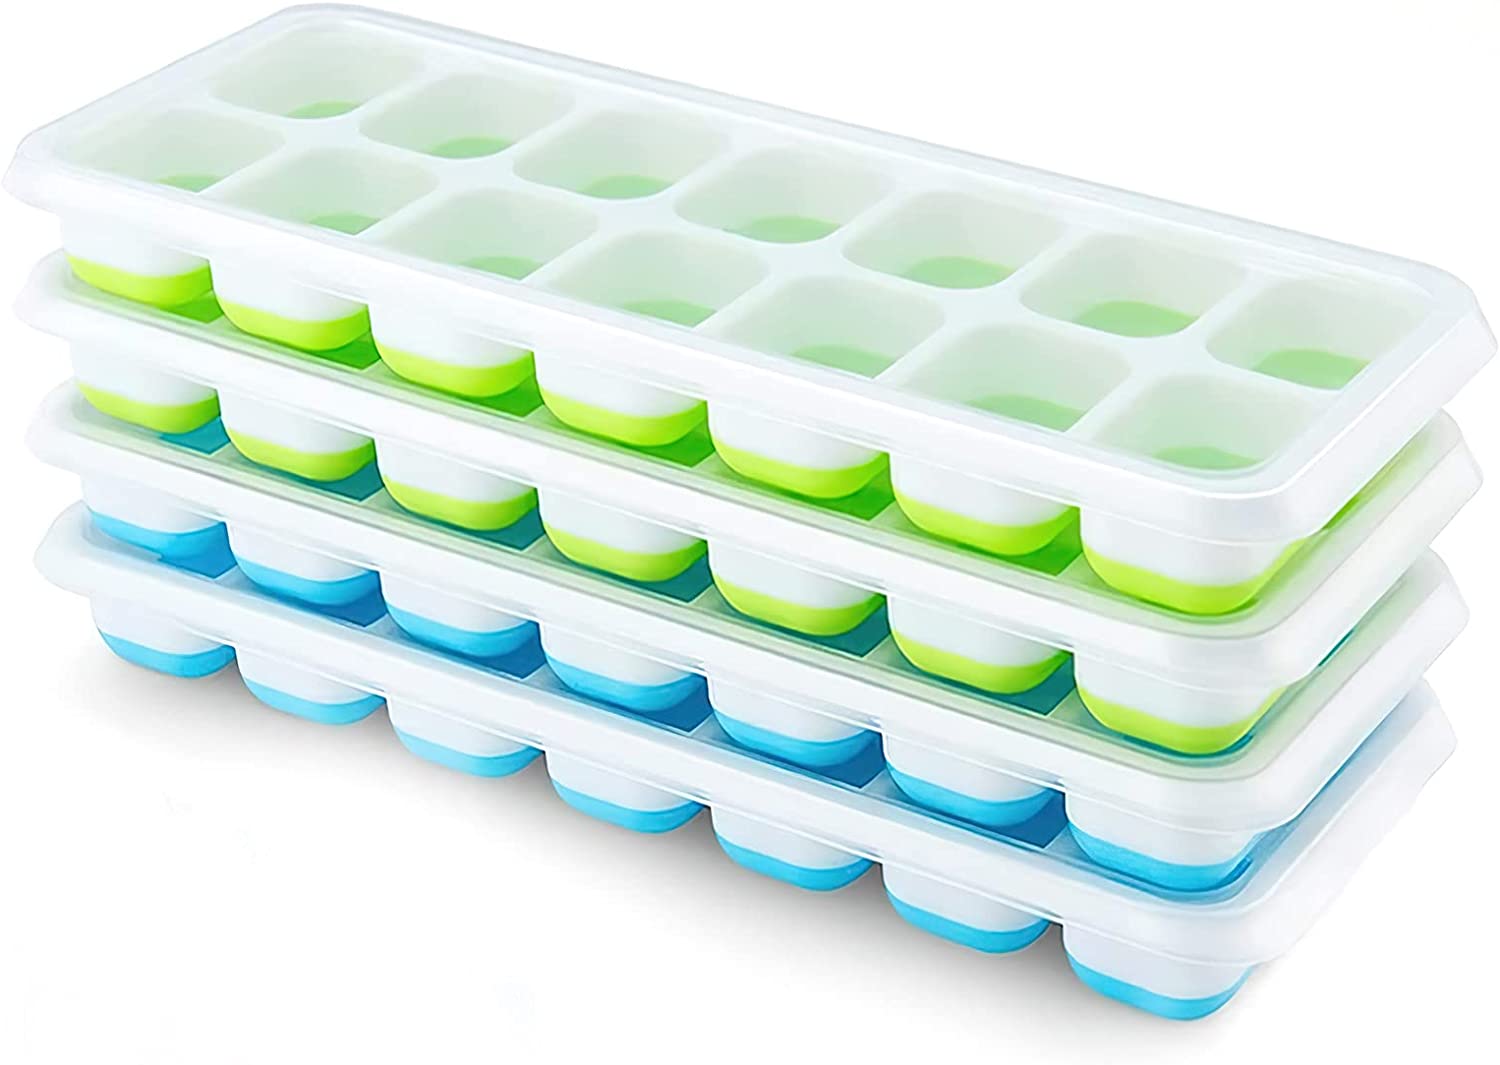 Ice Cube Trays and Ice Cube Storage Container Set With Airtight Locking  Lid, 3 Packs / 36 Big Trapezoid Ice Cubes, Stackable Plastic Ice Mold  Makers